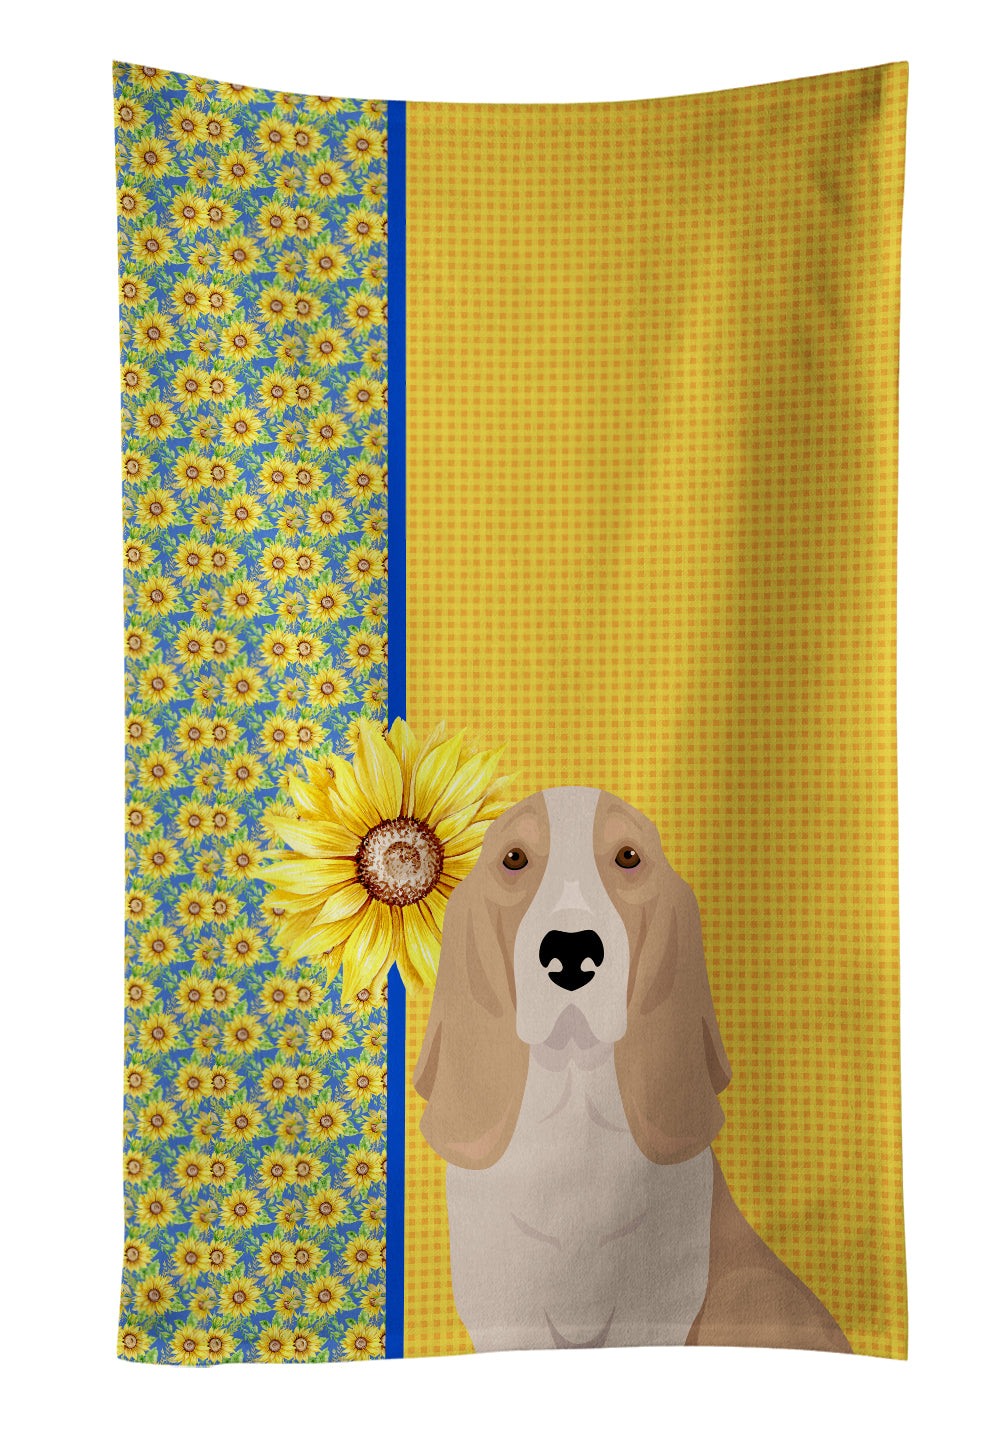 Buy this Summer Sunflowers Lemon and White Tricolor Basset Hound Kitchen Towel